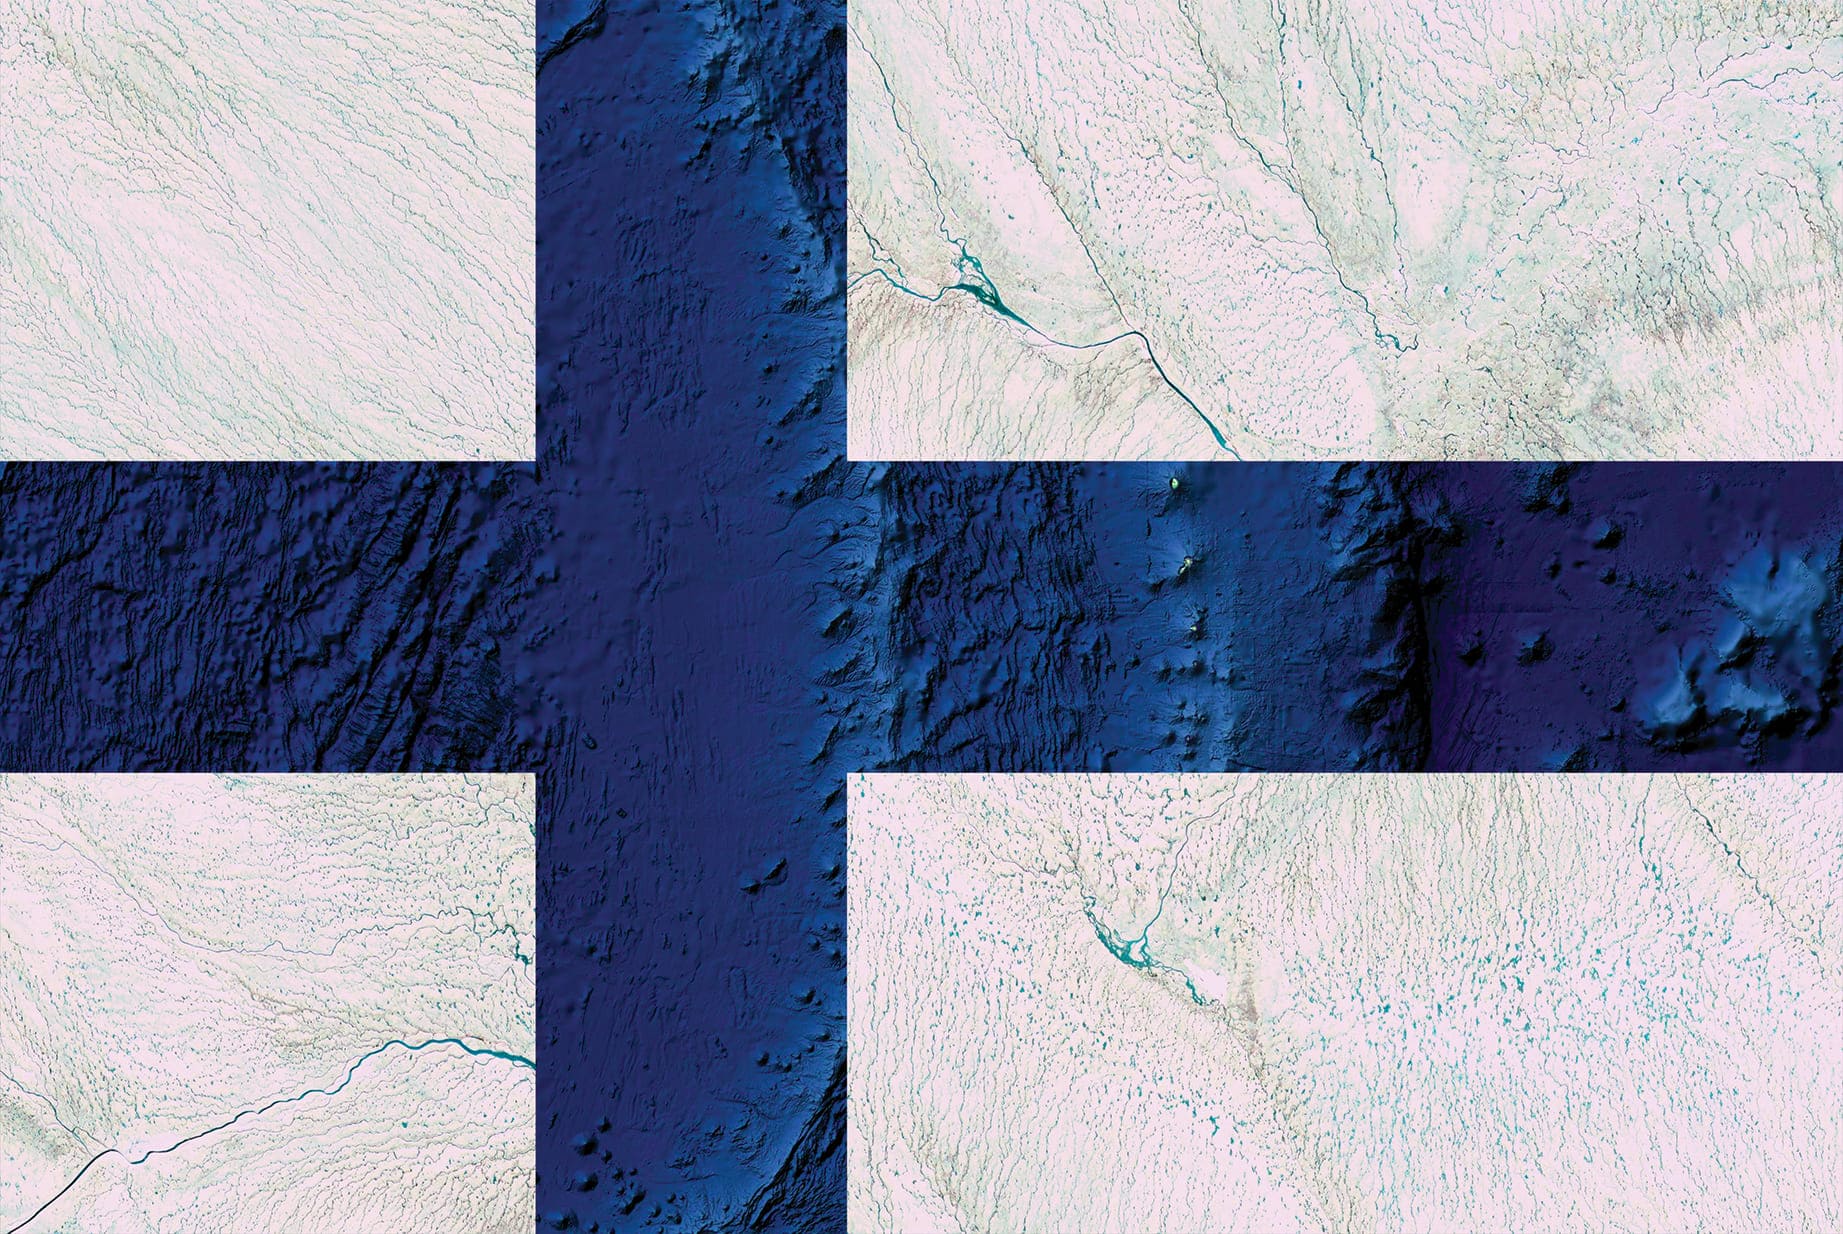 FINLAND EARTH FLAG, 2016, DIGITAL COLLAGE OF SATELLITE PHOTOGRAPHY FROM GREENLAND, OCEANIA, diasec print CM 67×100, limited edition 9